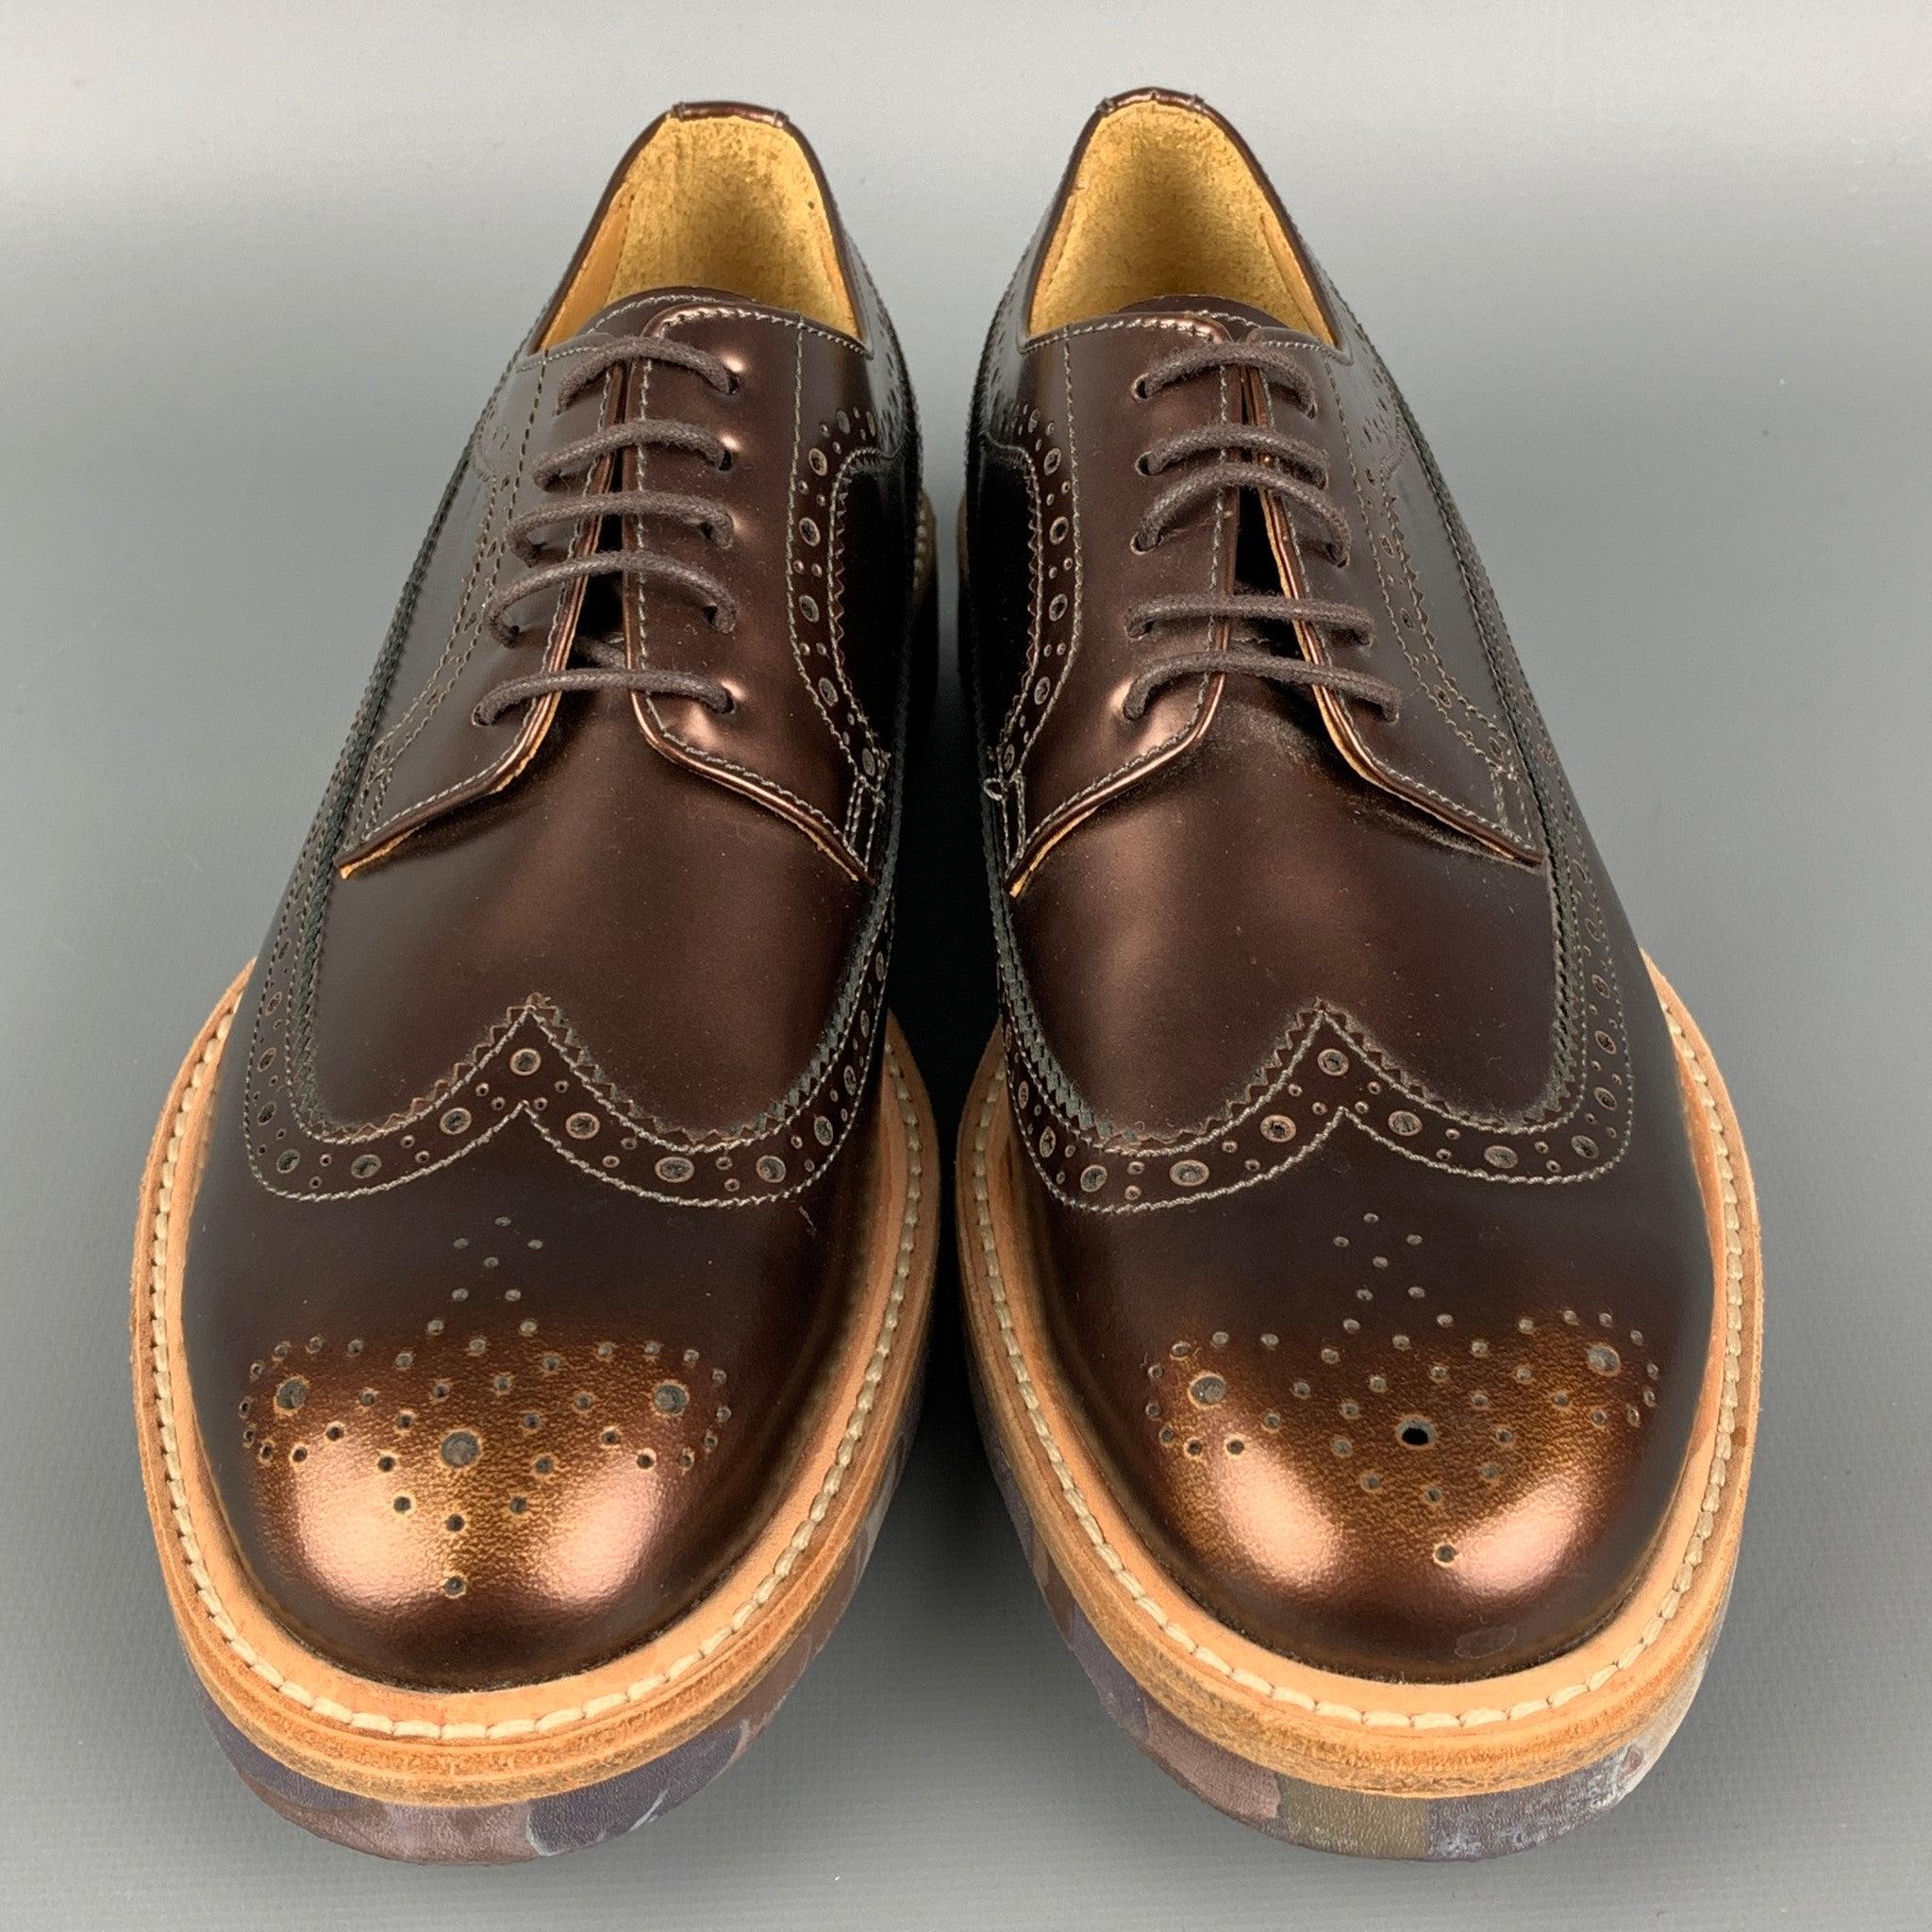 Women's PAUL SMITH Size 7.5 Copper Leather Perforated Wingtip Shoes